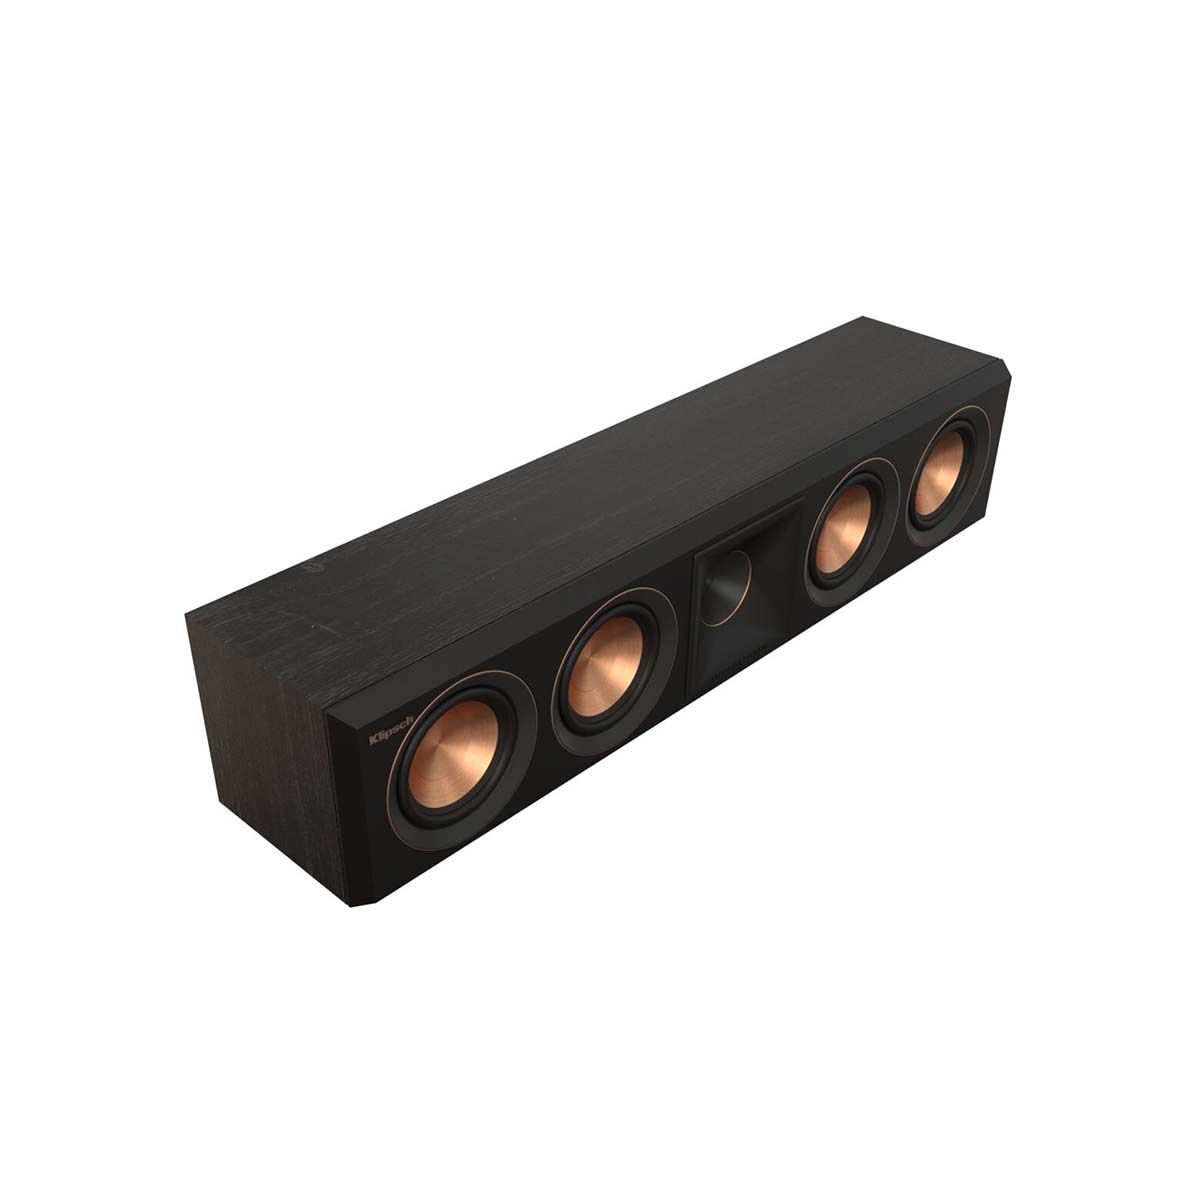 Klipsch RP-404C II Center Channel Speaker - Ebony - angled front view without grill